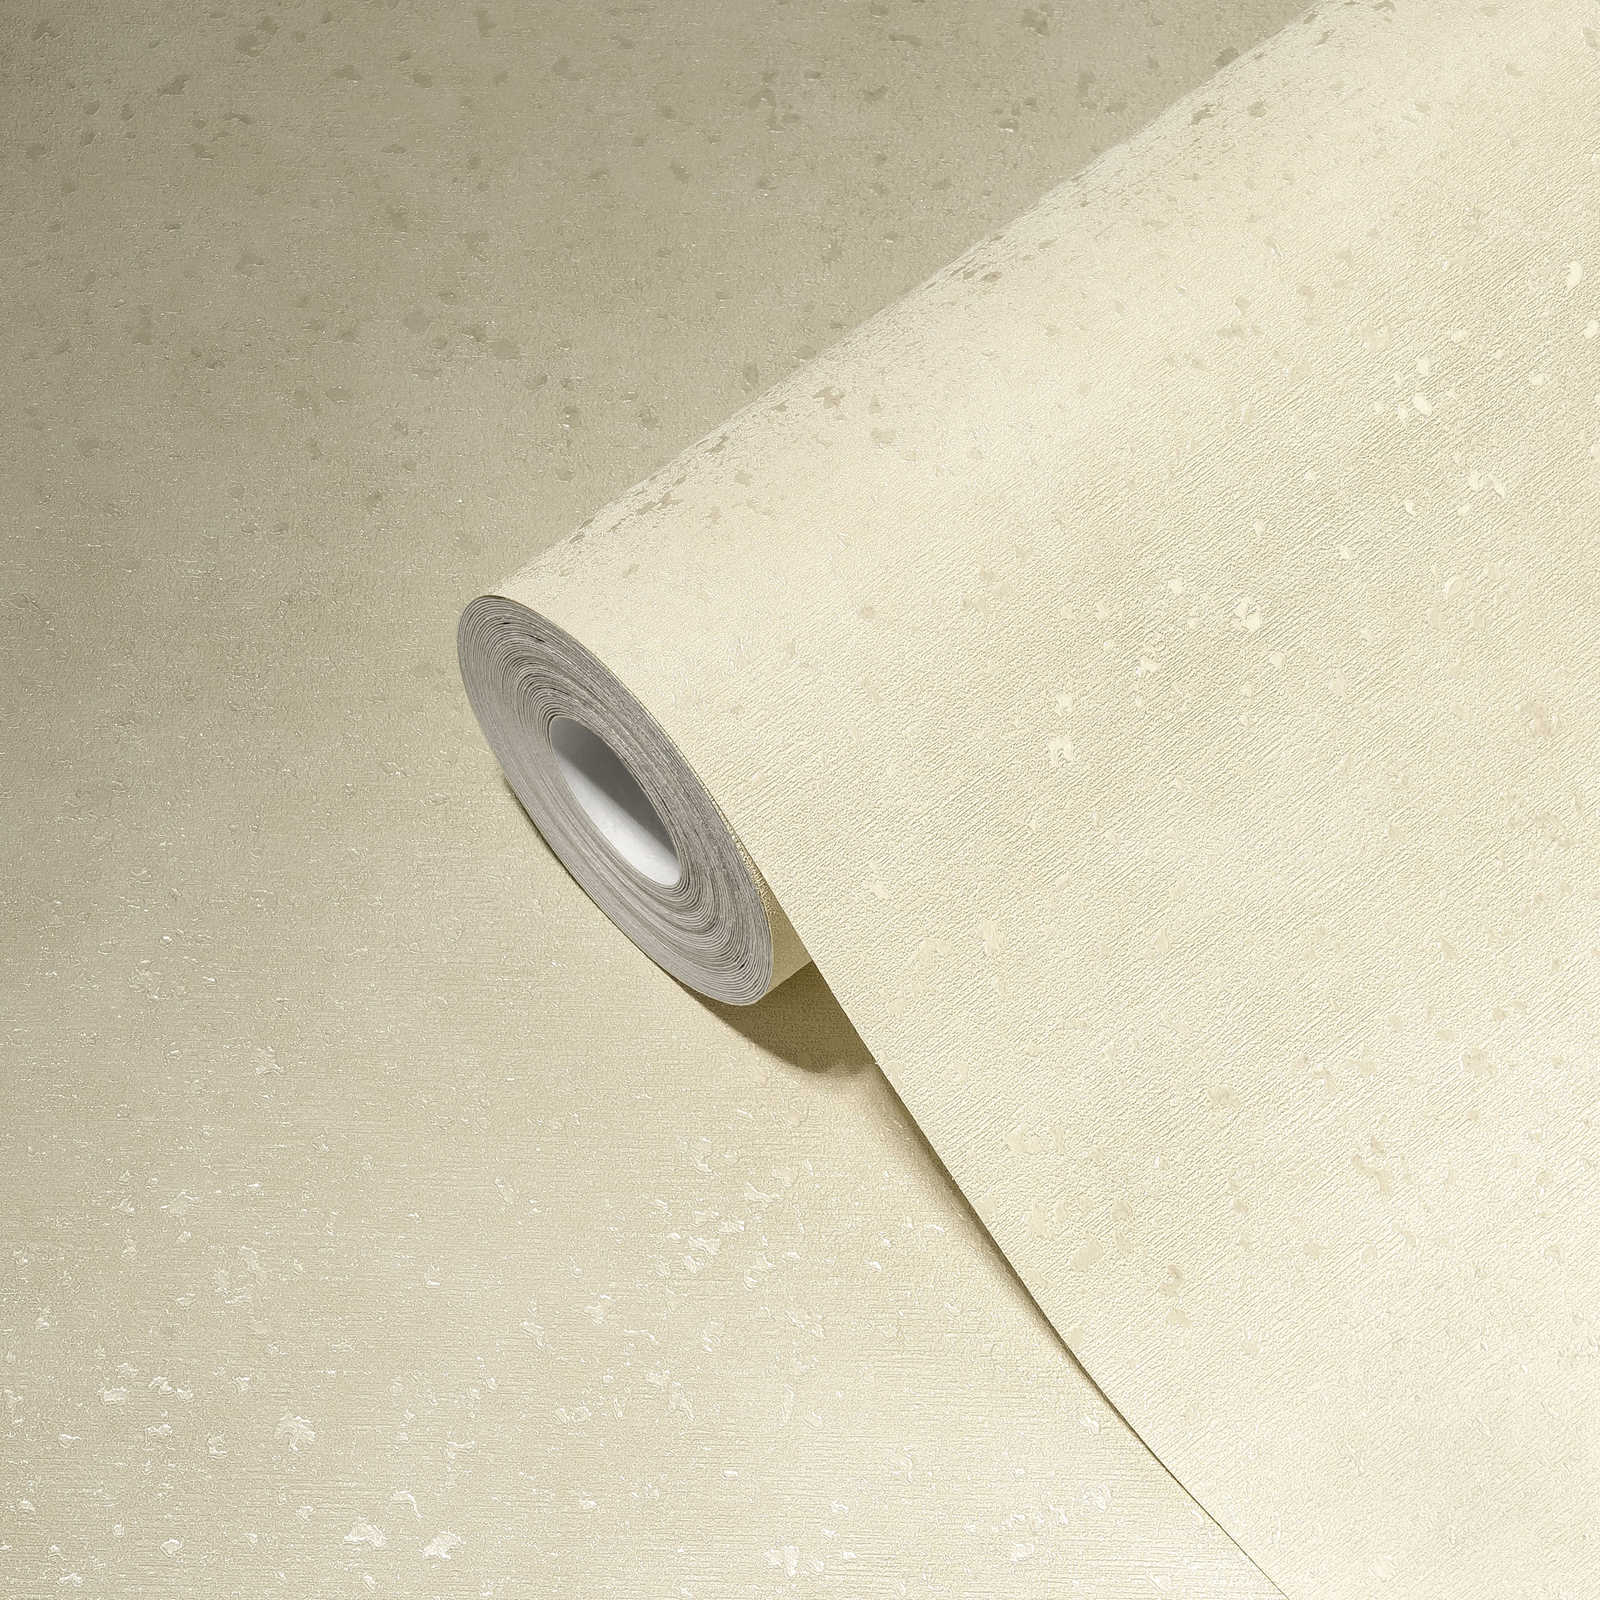             Cream non-woven wallpaper shaded, satin with texture effect
        